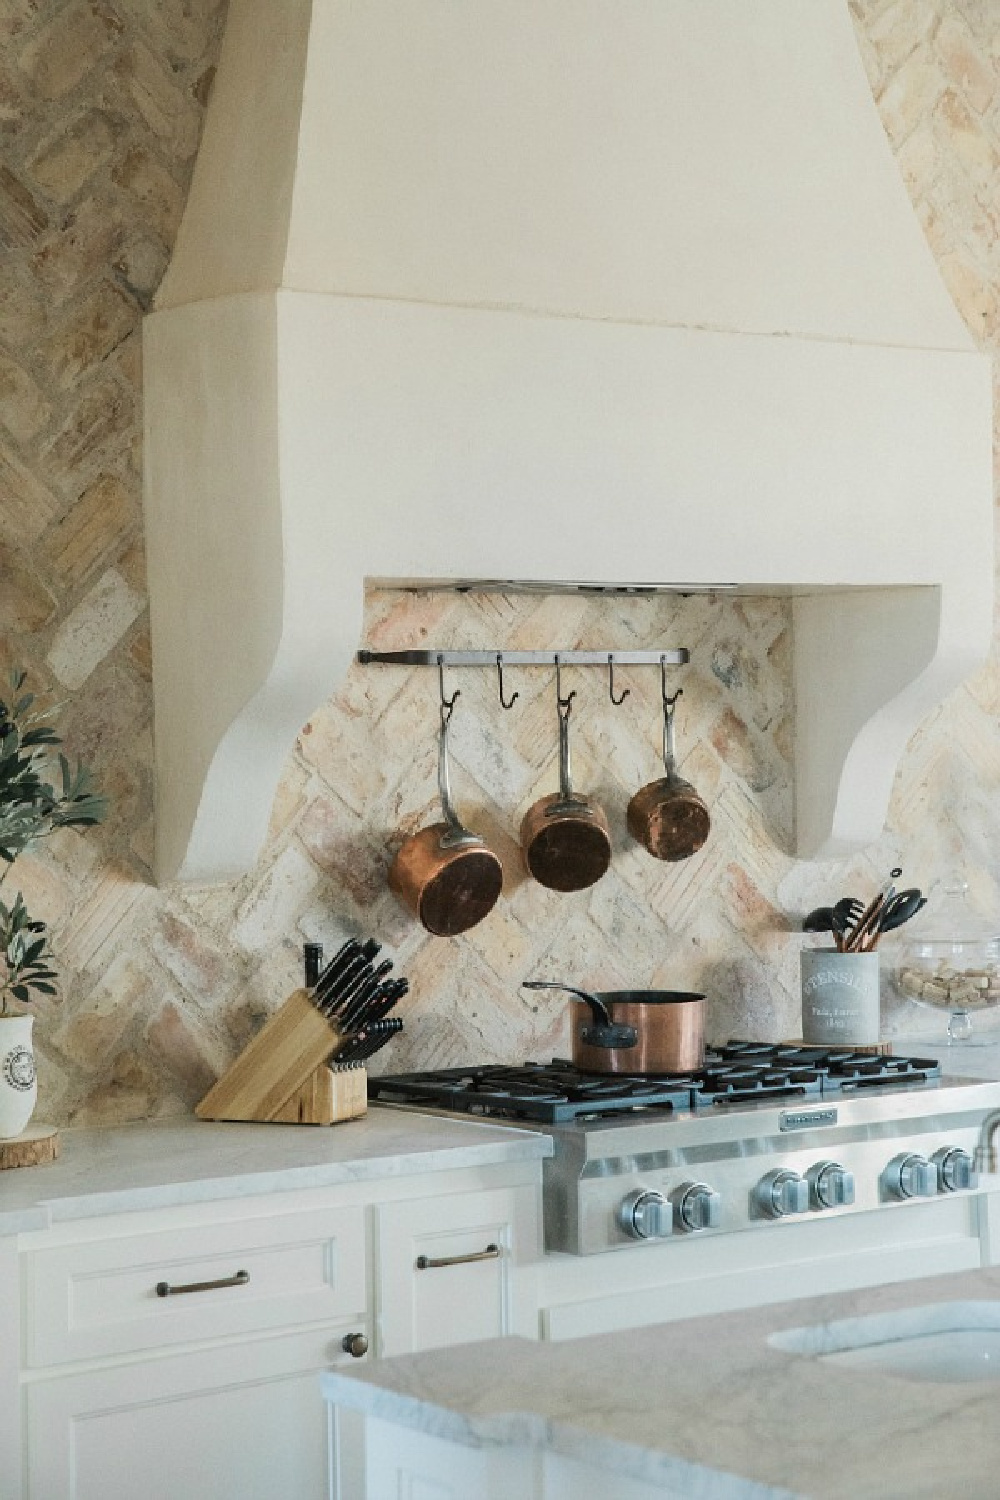 Rustic elegant French country farmhouse kitchen with beautiful stucco range hood, copper pots, reclaimed Chicago brick backsplash, arabescato marble counters, and lanterns over island. Brit Jones Design. See more Gorgeous European Country Interior Design Inspiration on Hello Lovely. #europeancountry #frenchfarmhouse #interiordesign